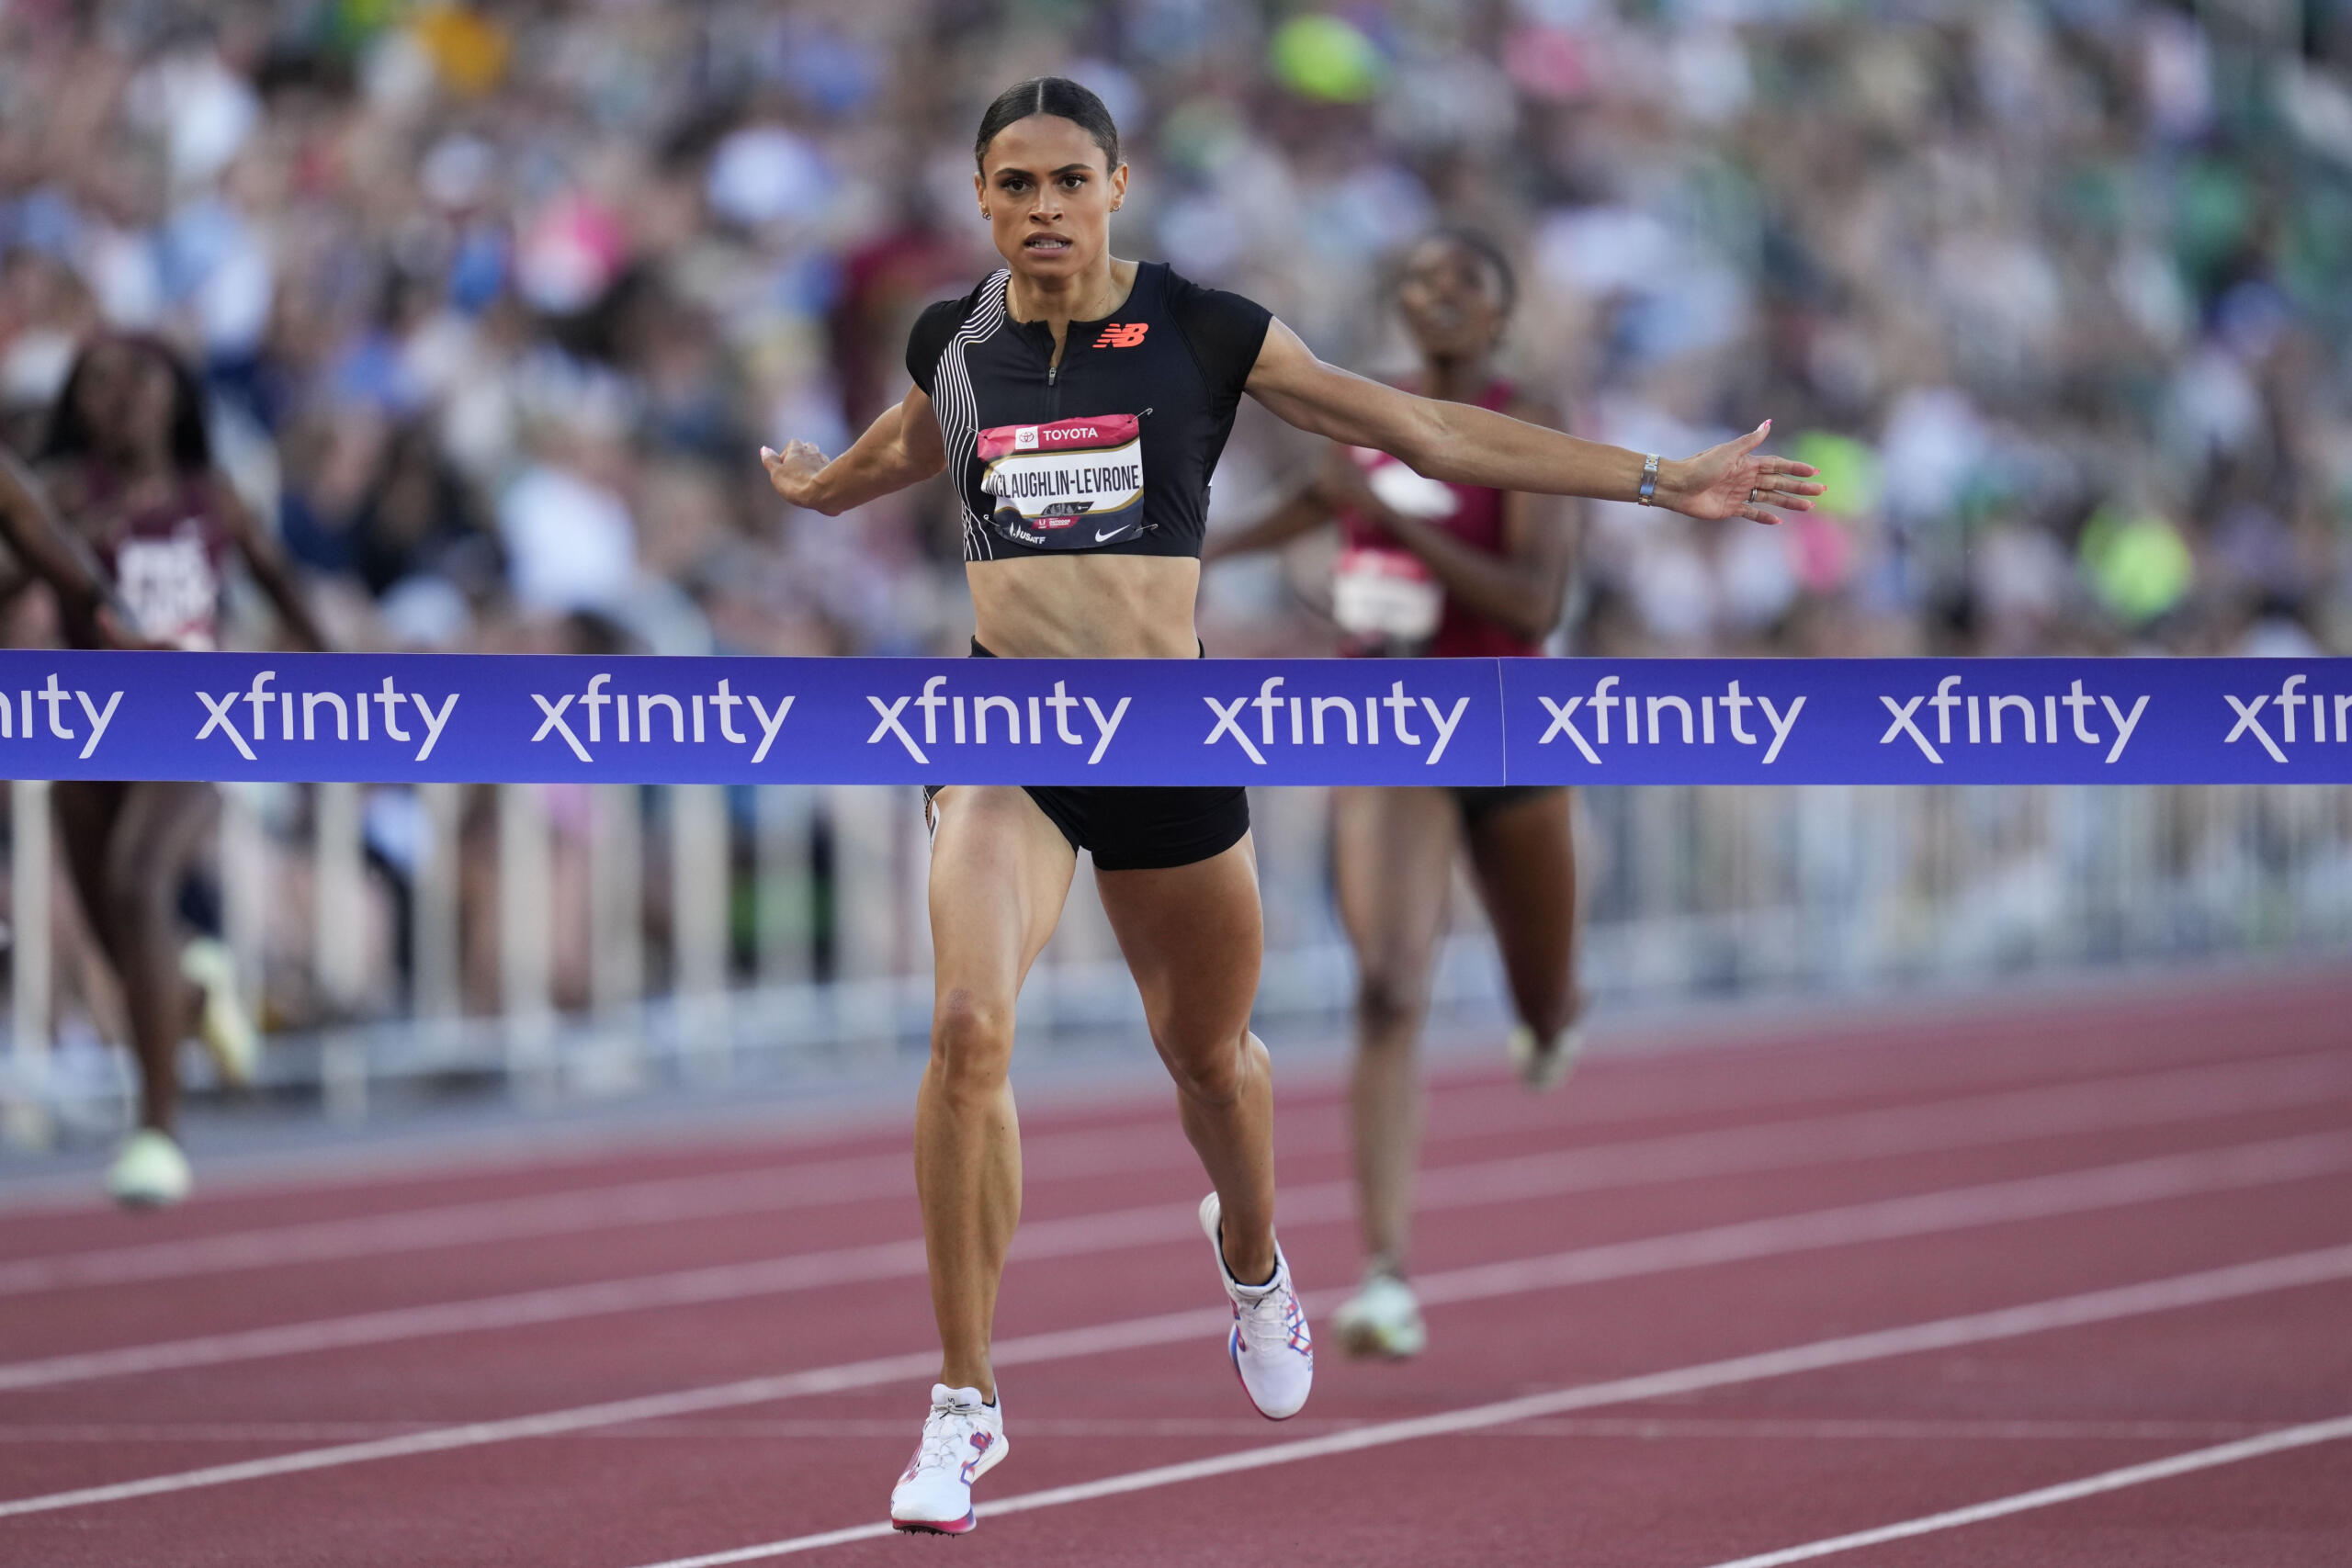 Sydney McLaughlin-Levrone crosses the finish line to win the women's 400 meter final during the U.S. track and field championships in Eugene, Ore., Saturday, July 8, 2023.